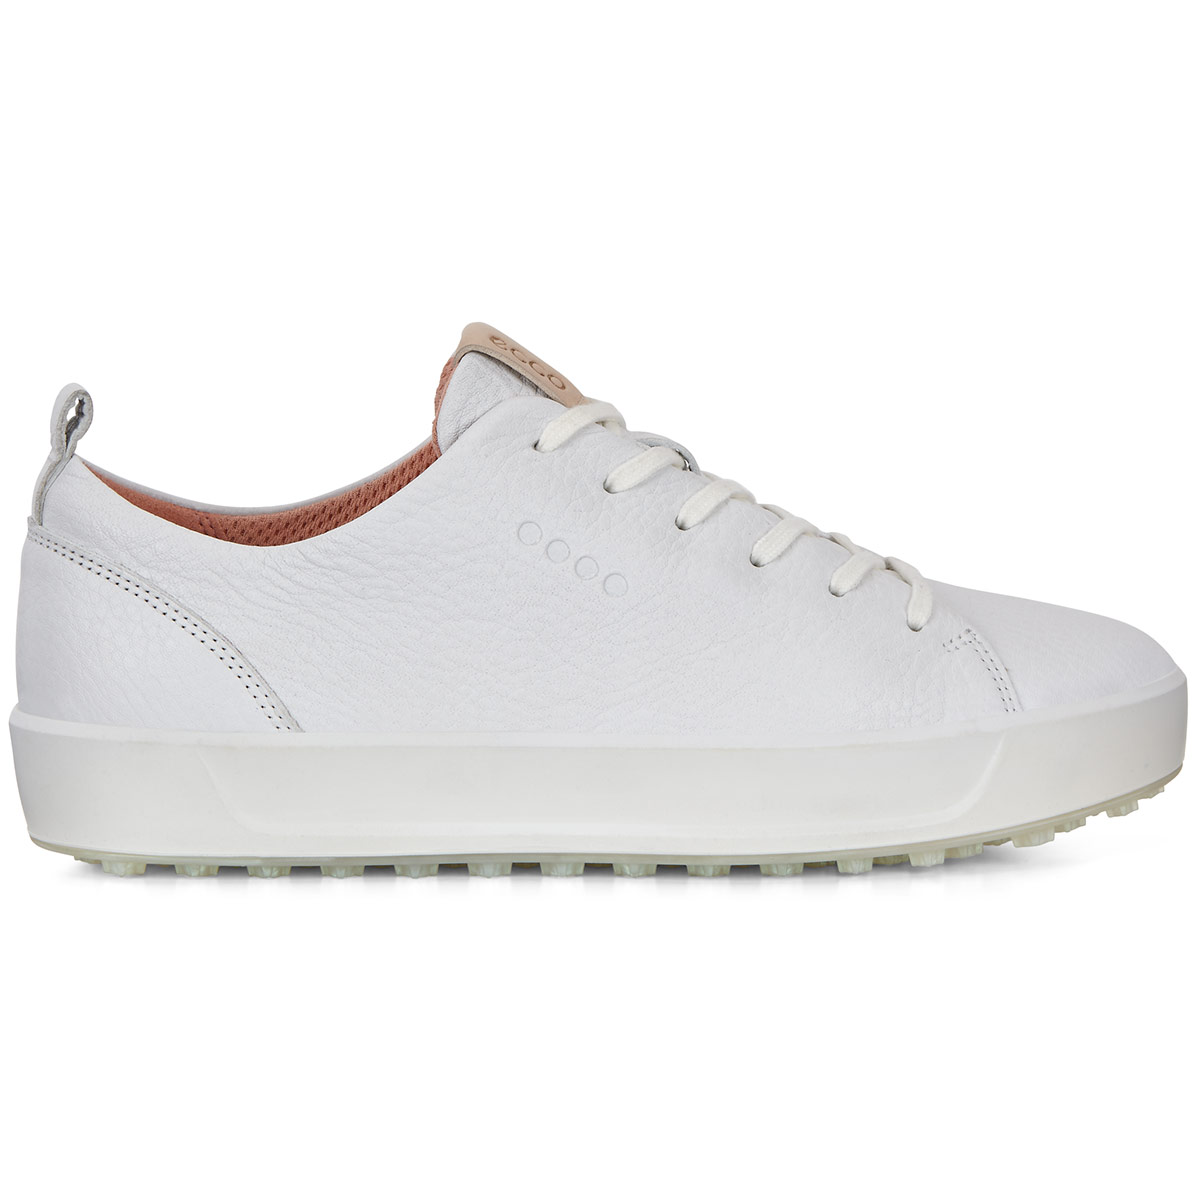 ECCO Golf Soft Ladies Shoes from 